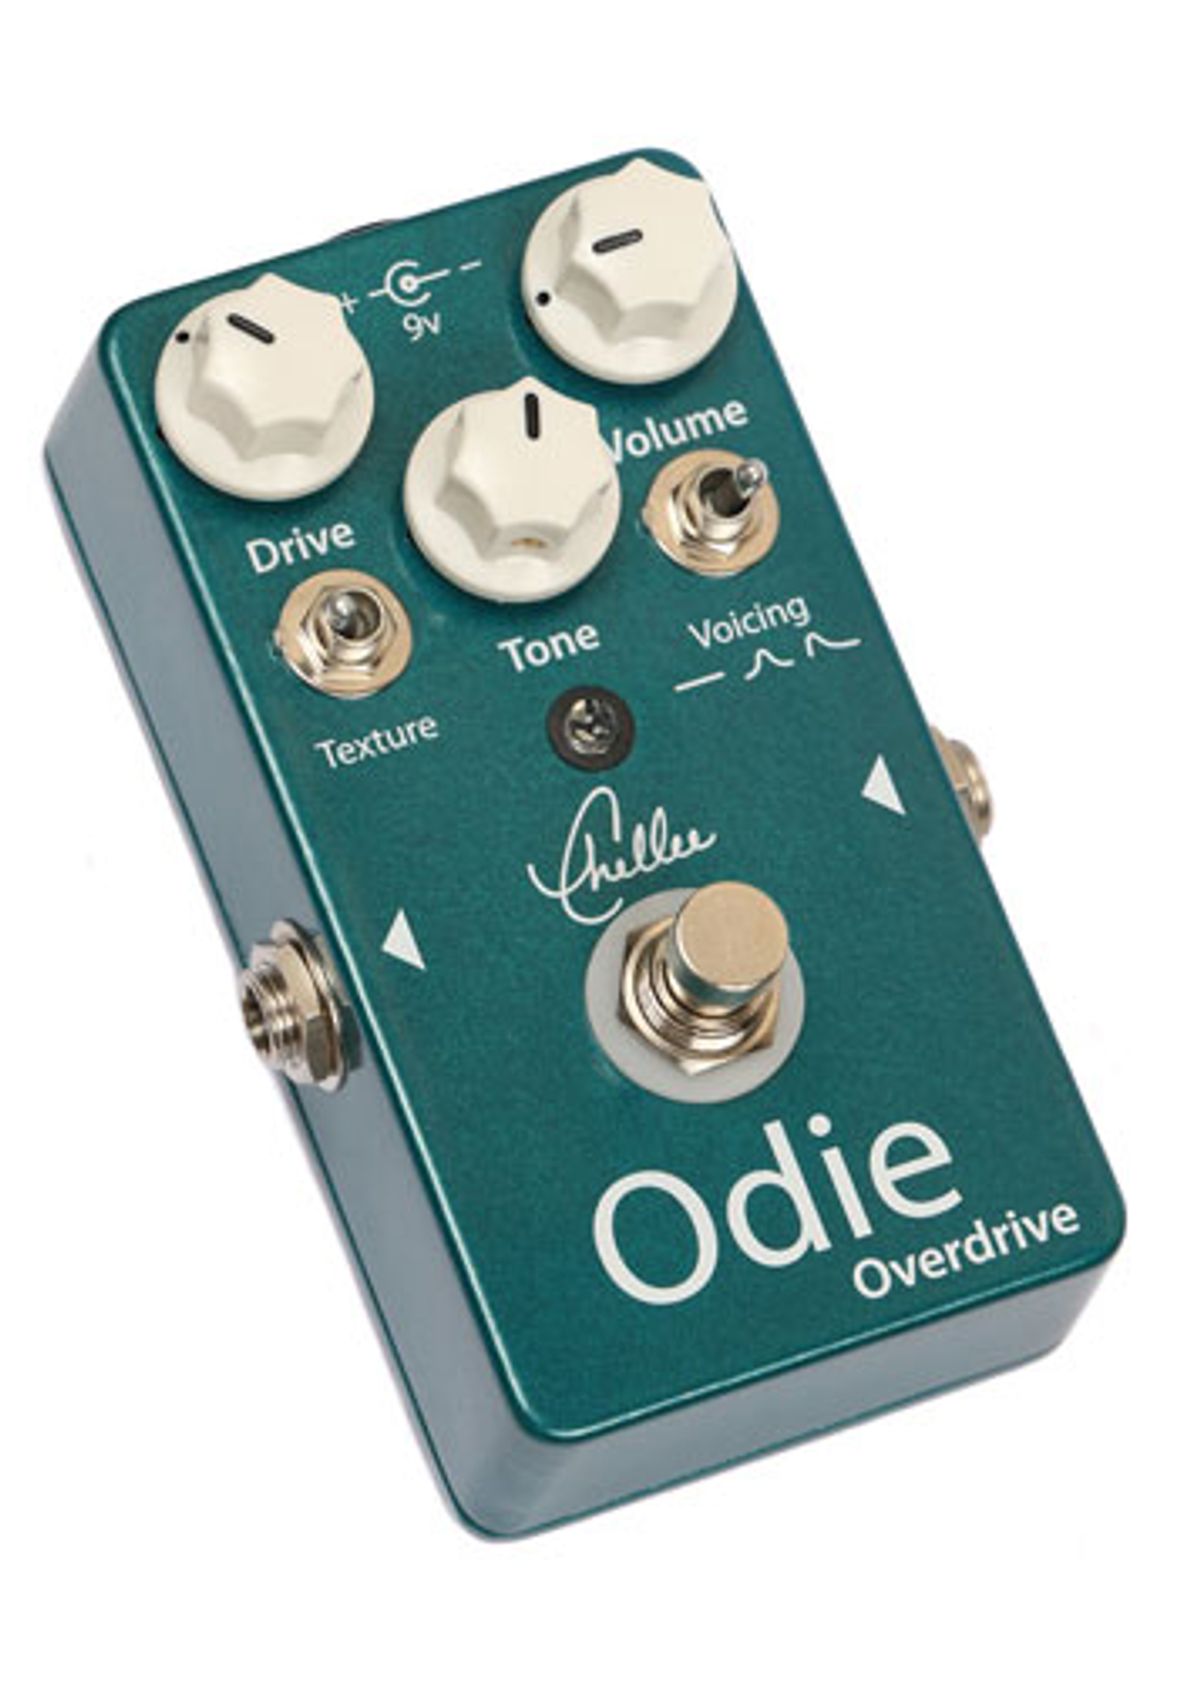 Chellee Guitars Introduces the Odie Overdrive Pedal